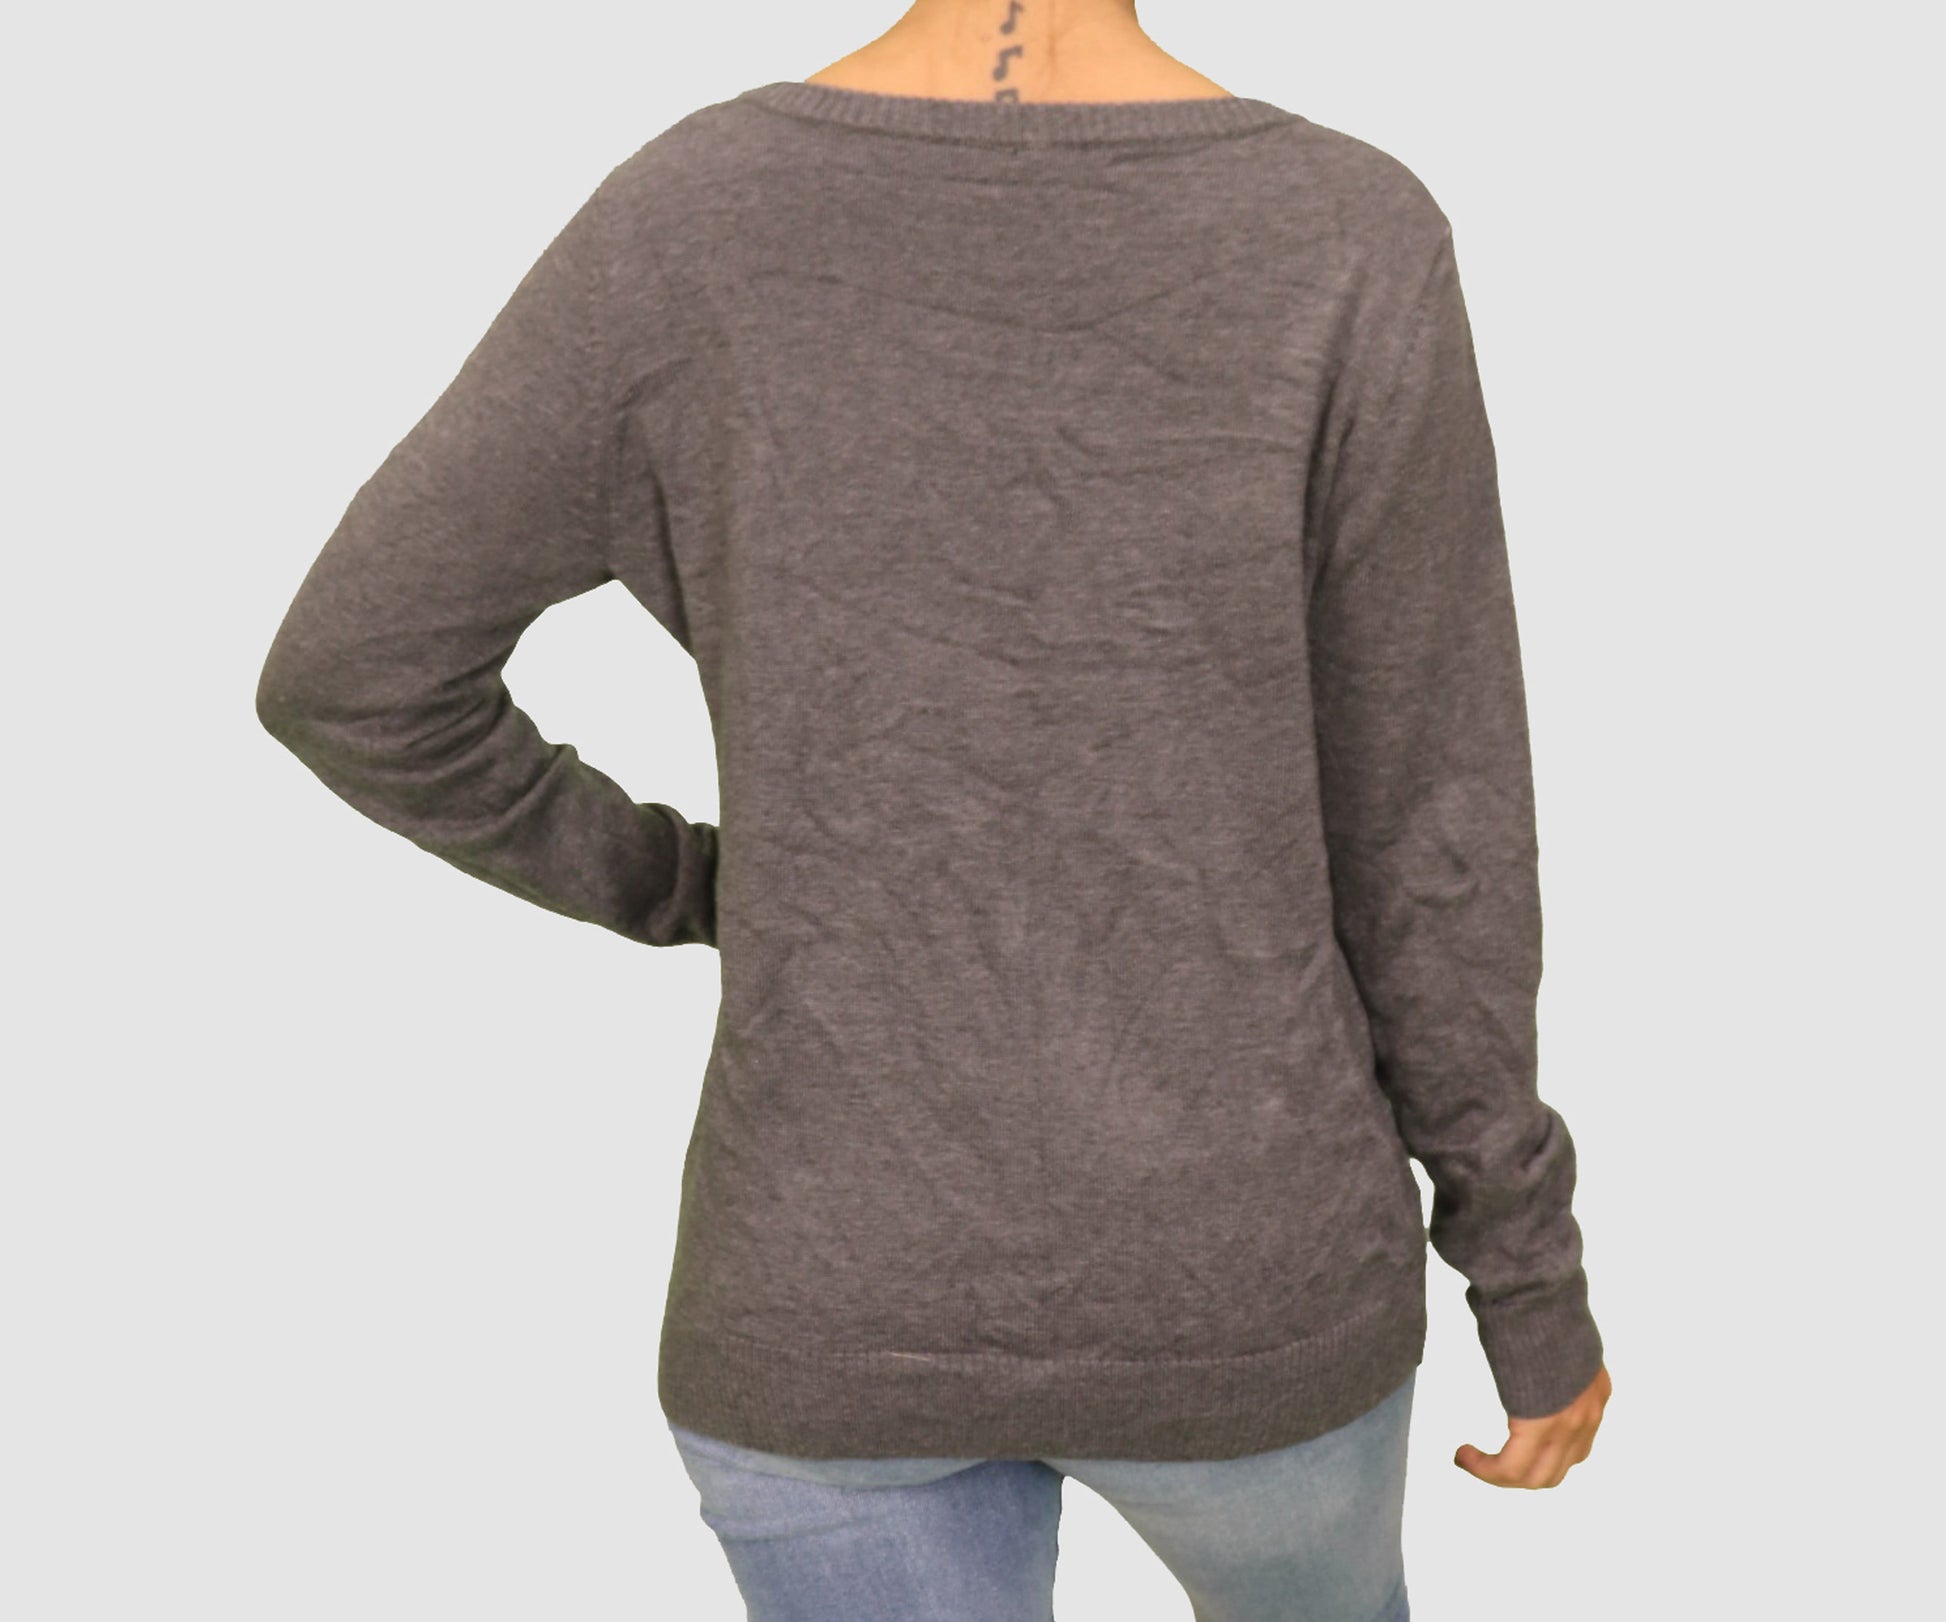 ND NEW DIRECTIONS Womens Tops Large / Grey Long Sleeve Top